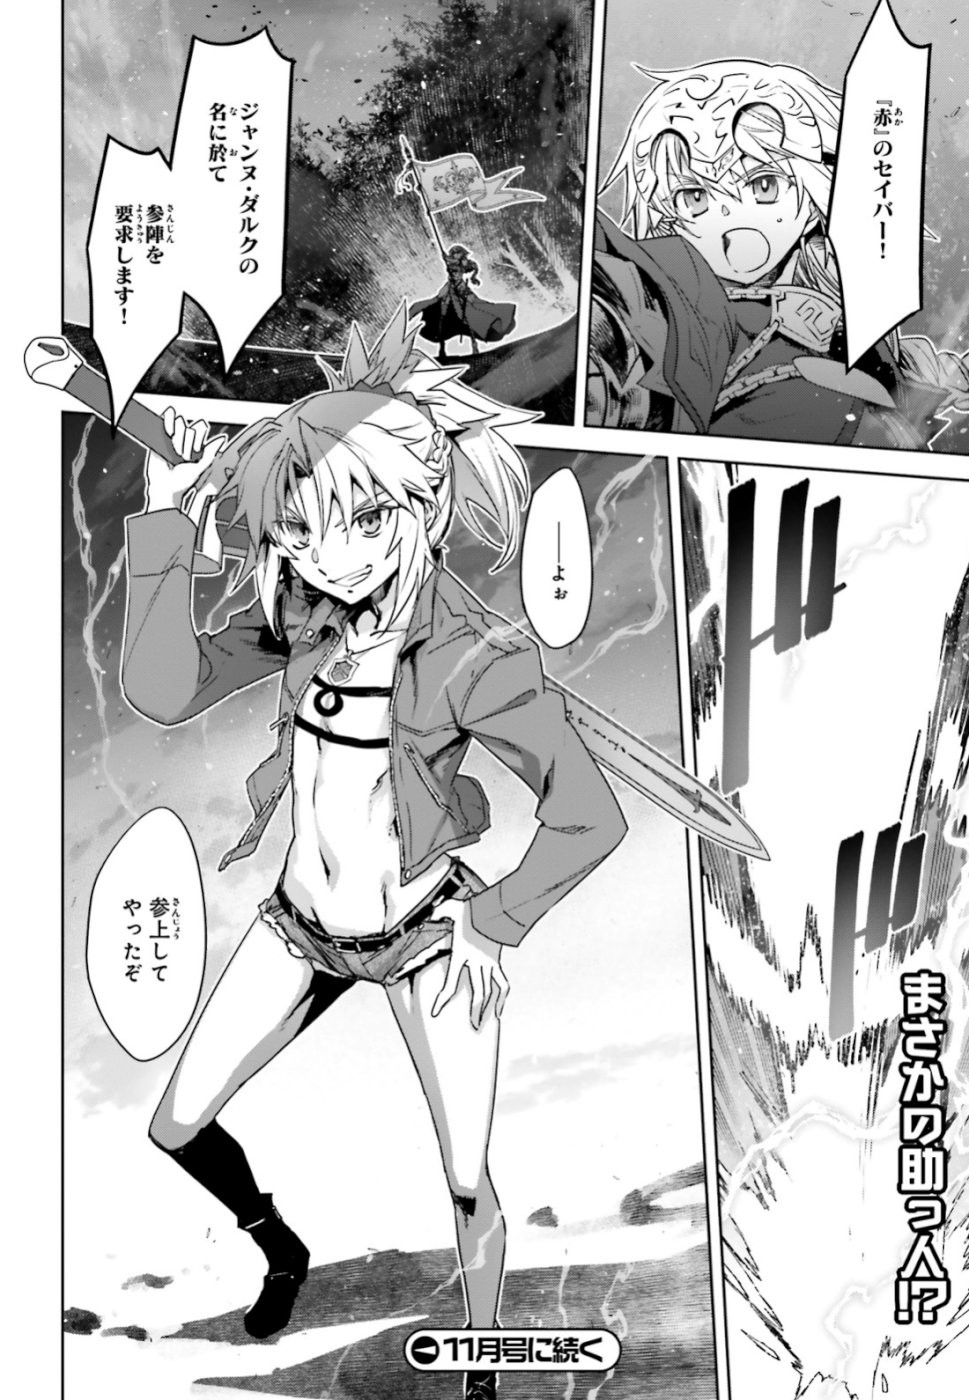 Fate-Apocrypha - Chapter 35 - Page 16